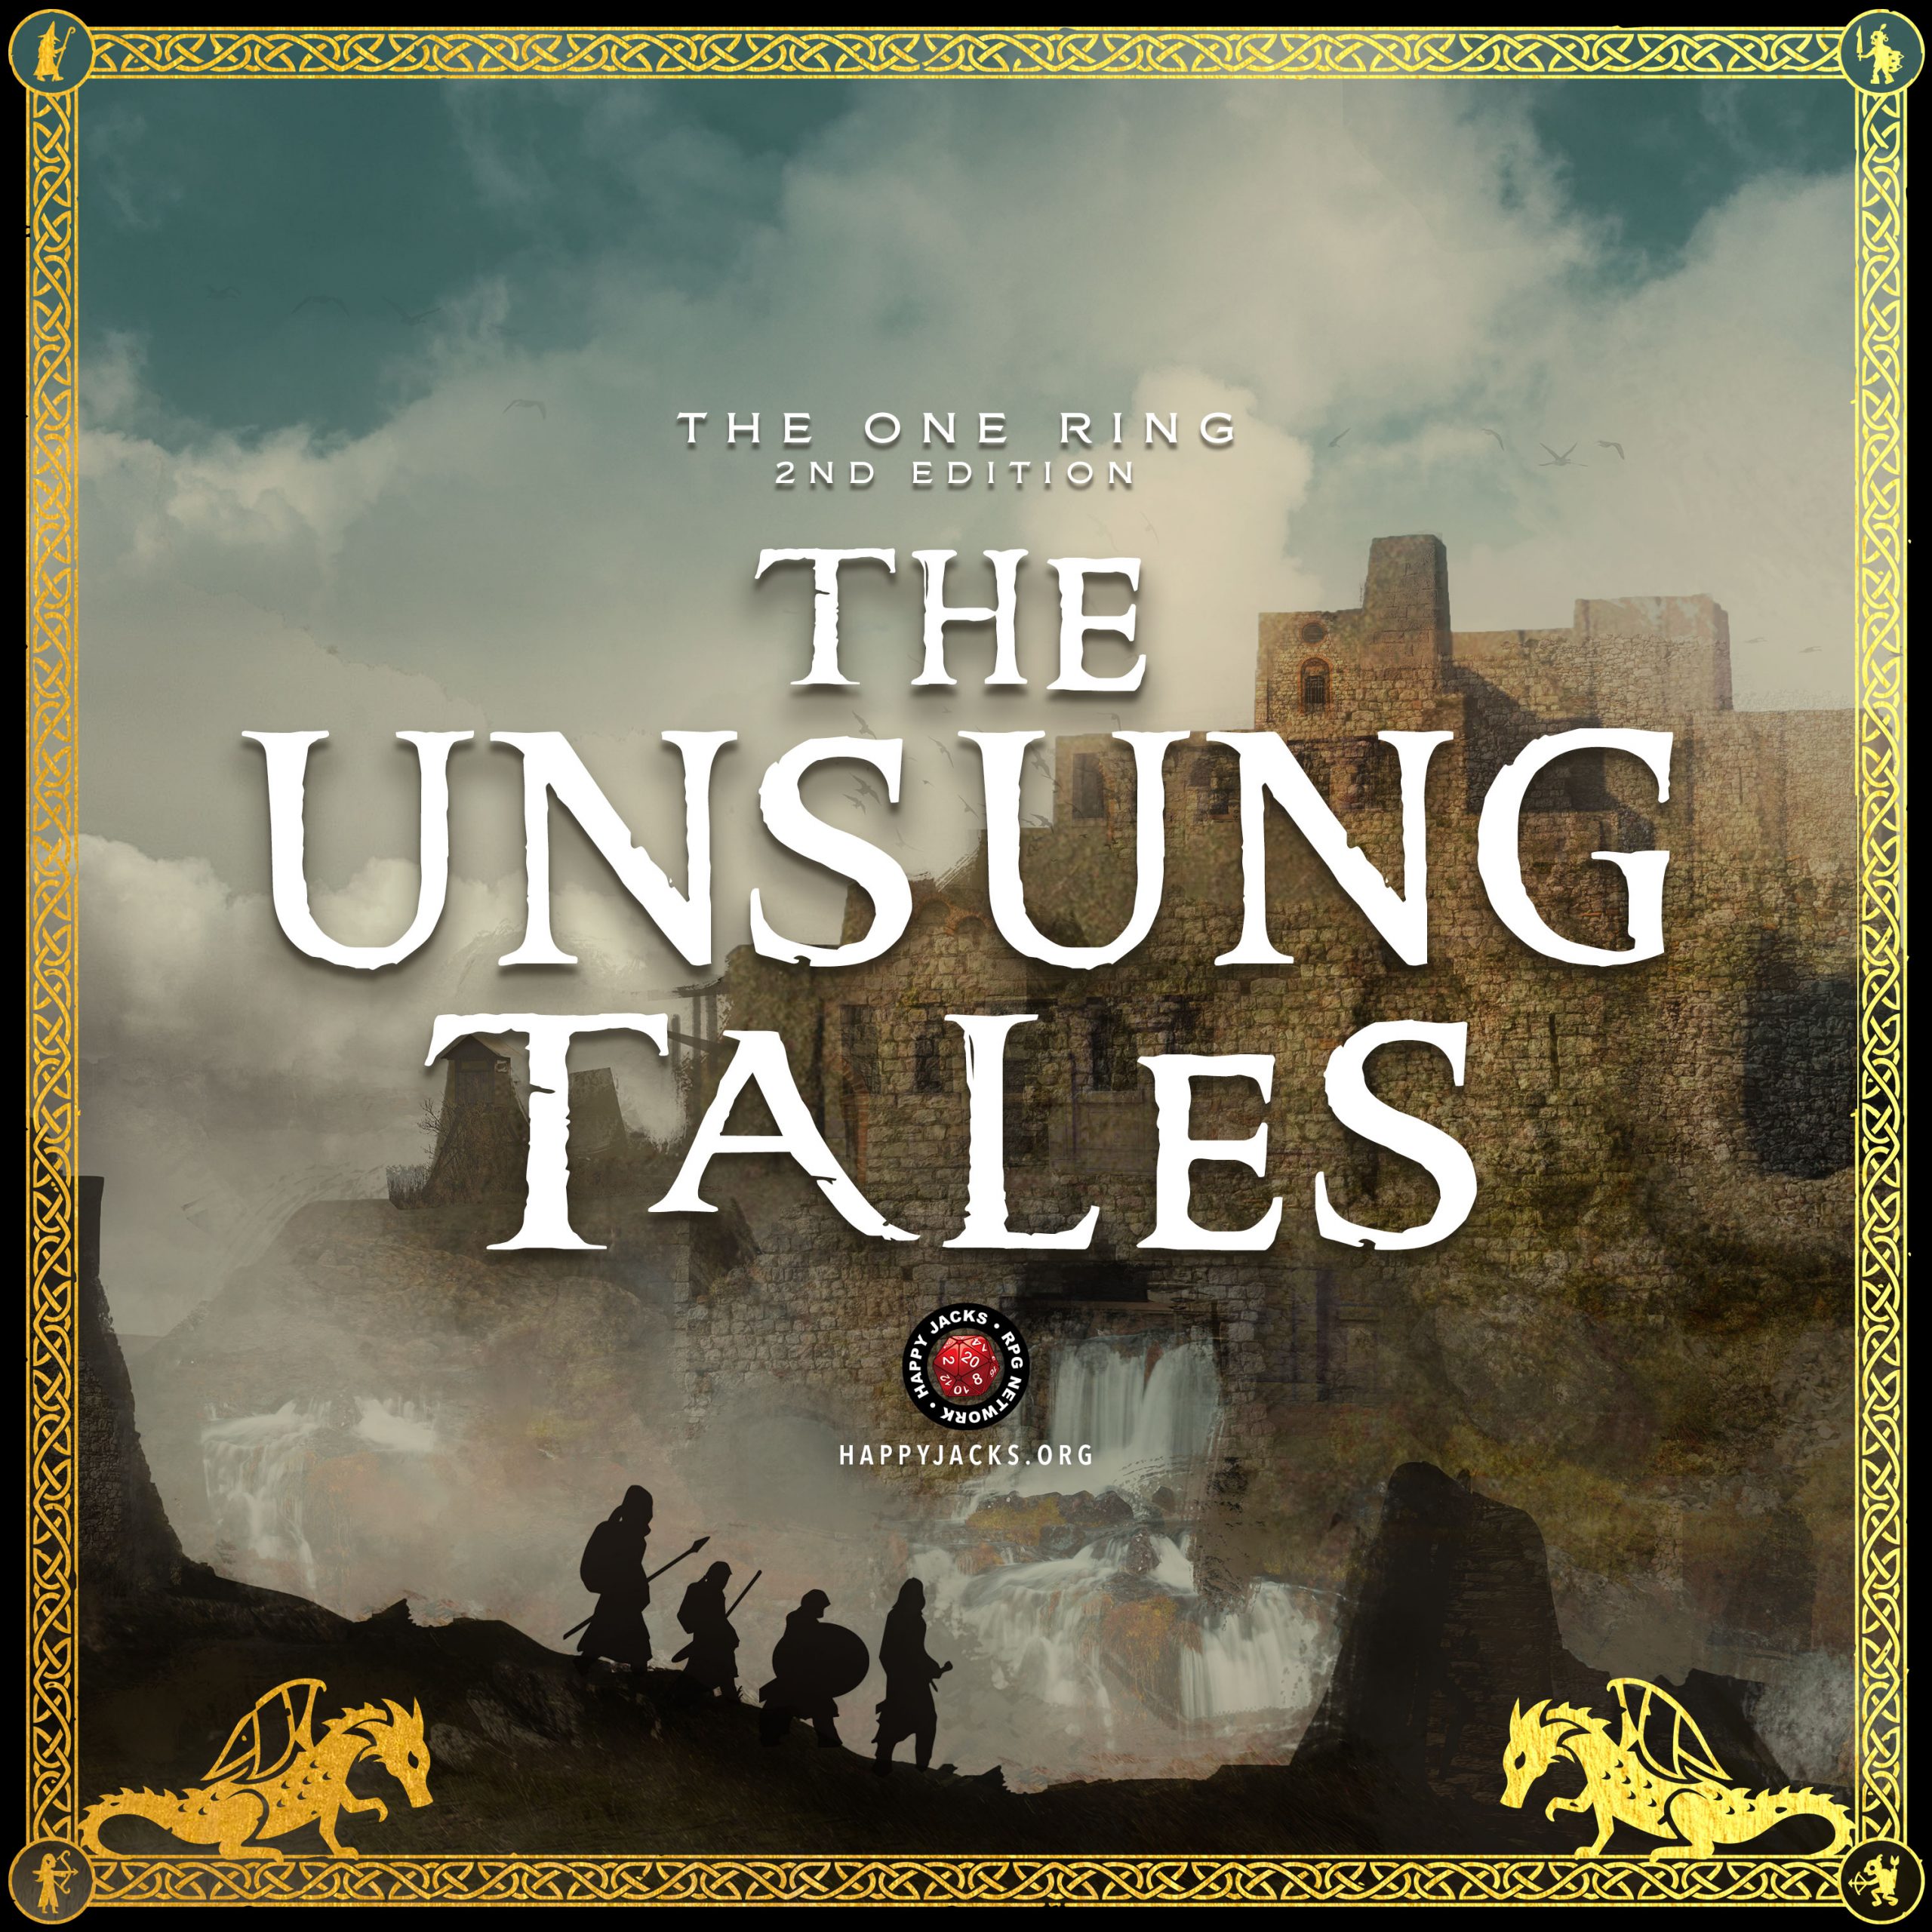 UNSUNG11 The Gray Havens | The Unsung Tales | The One Ring 2e